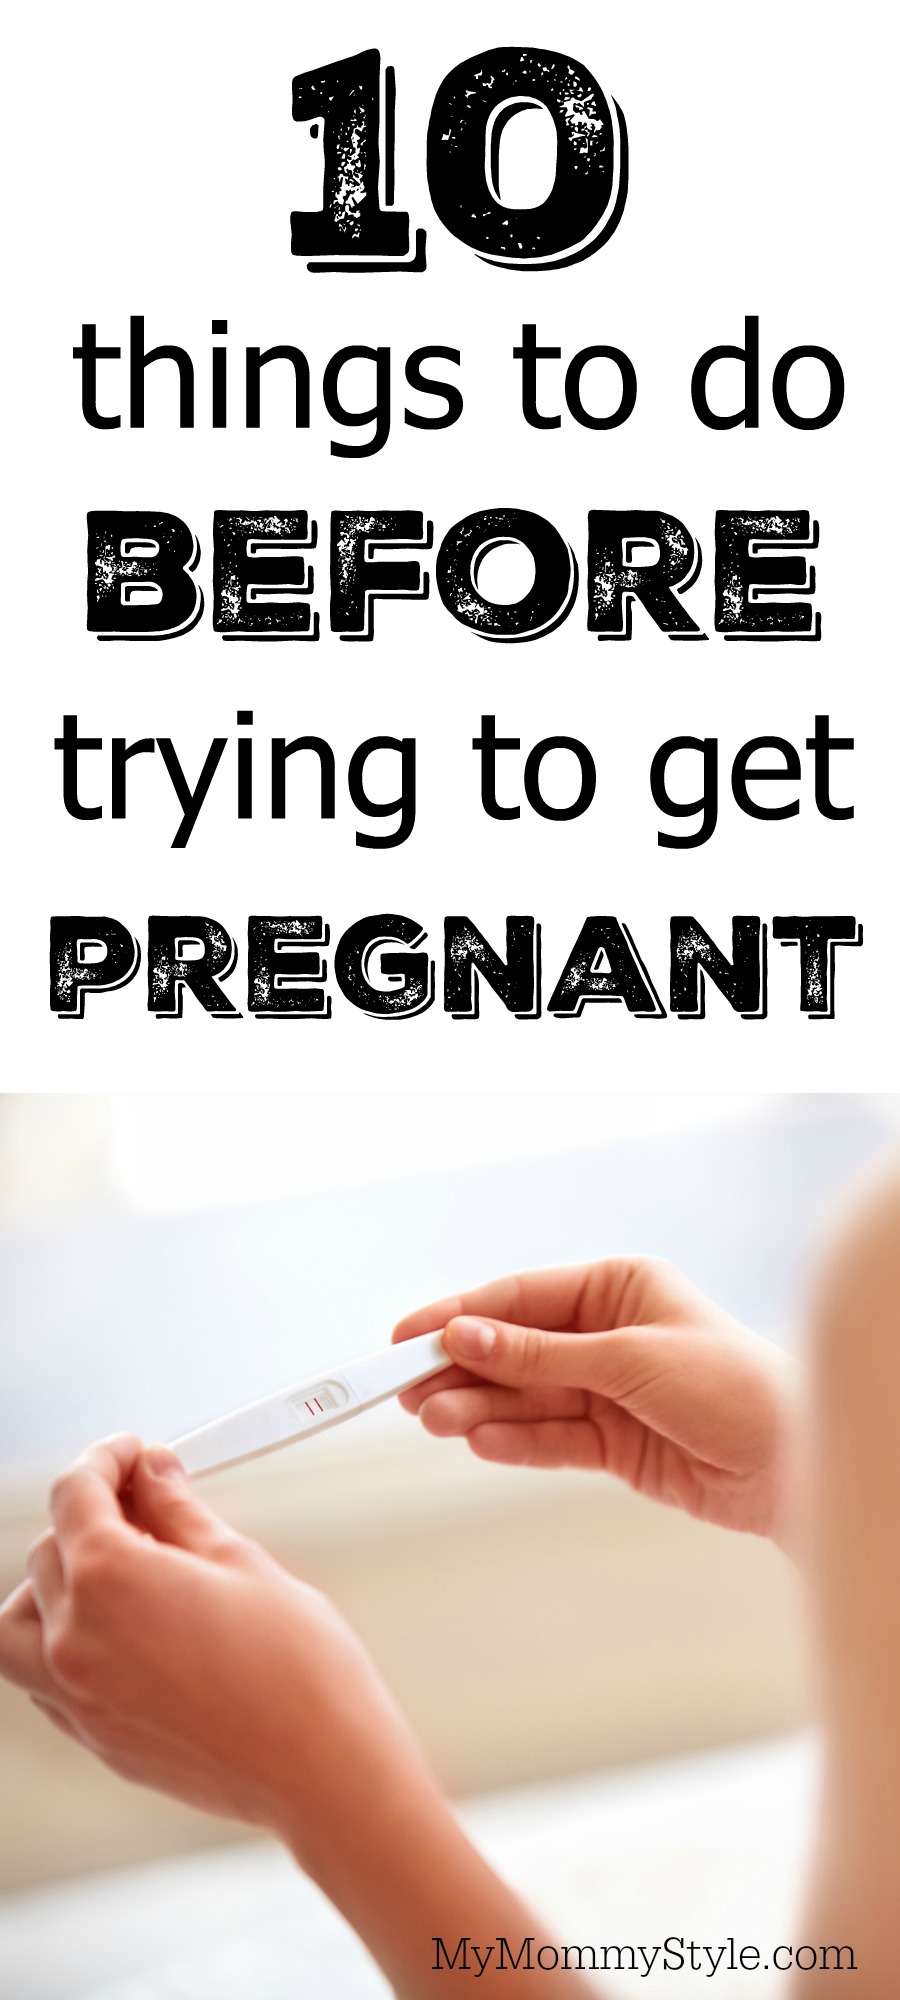 girlfriend trying get pregnant